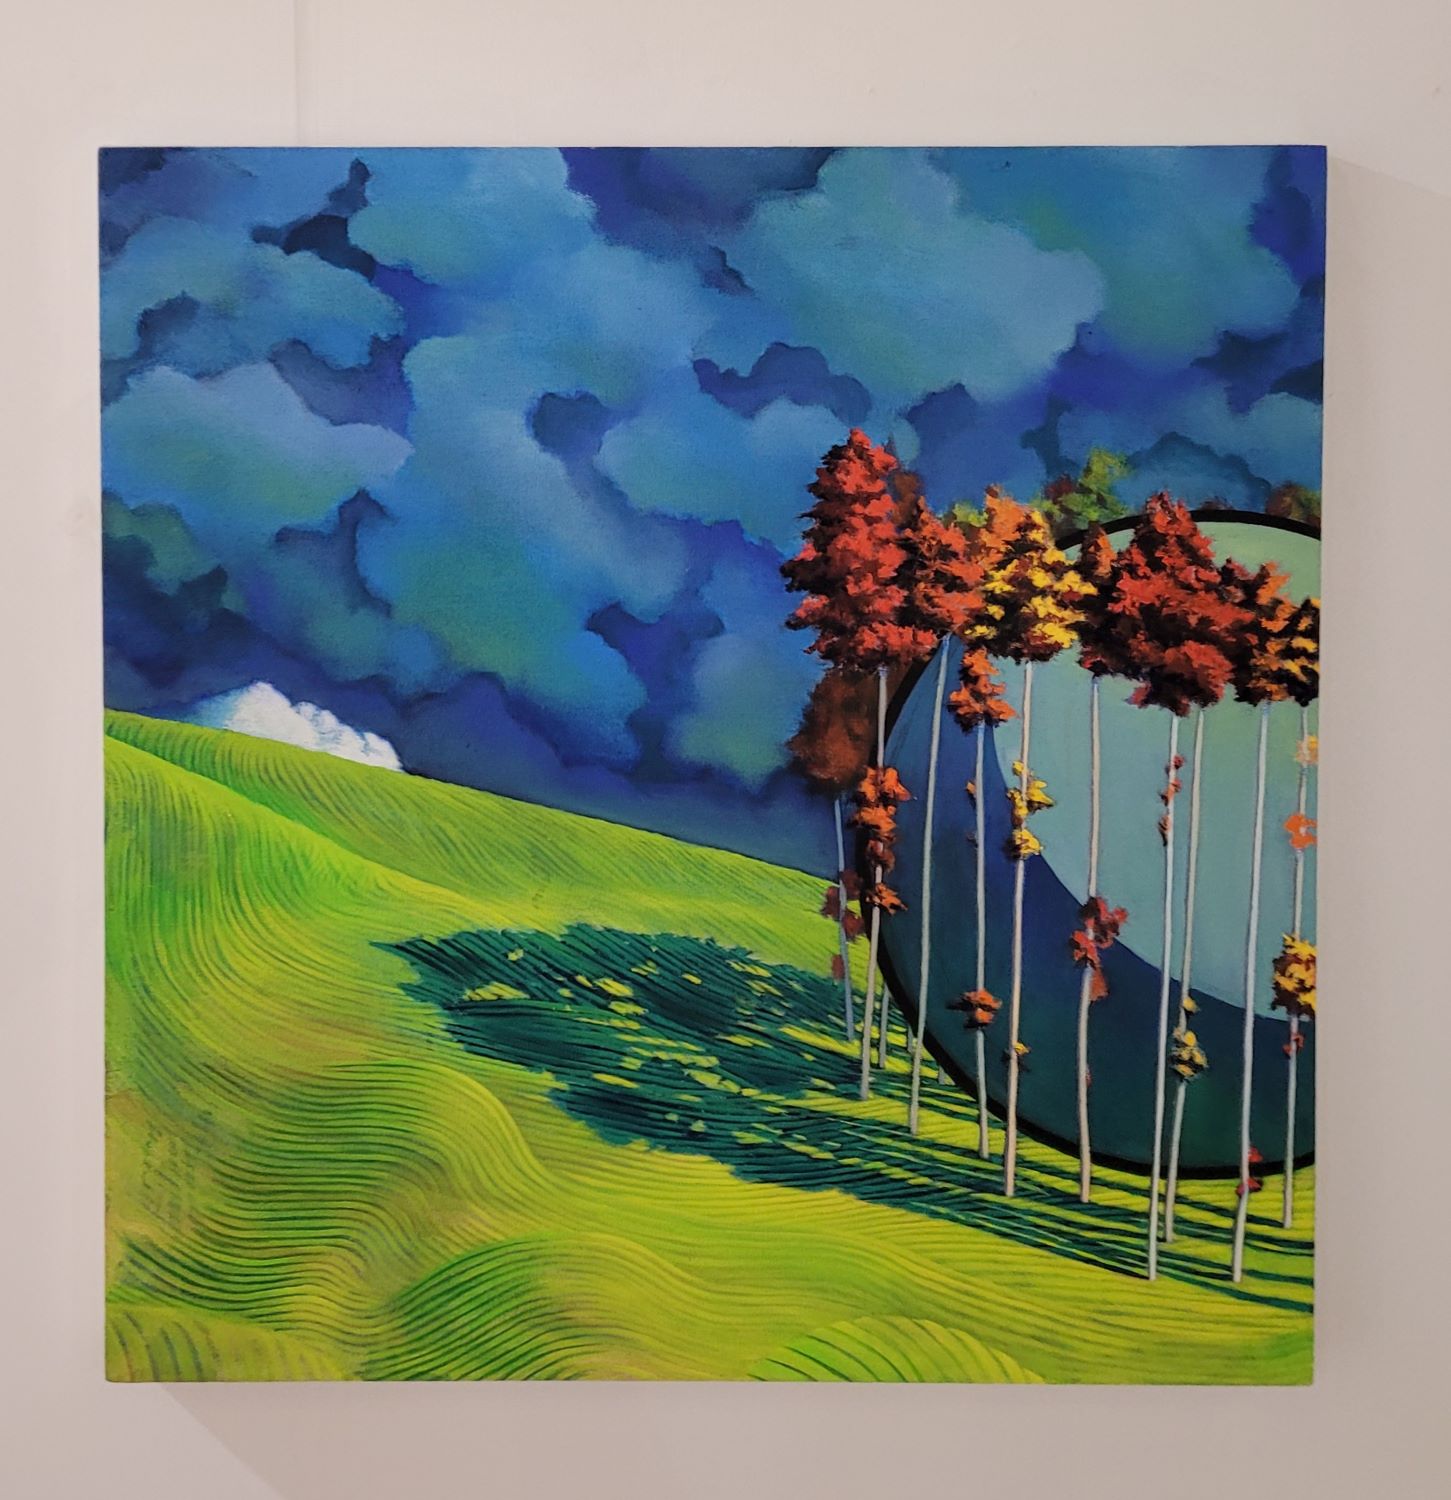 Large painting of a surreal landscape, has large 2D ball surrounded by trees, wavy grass, and abstract clouds. 